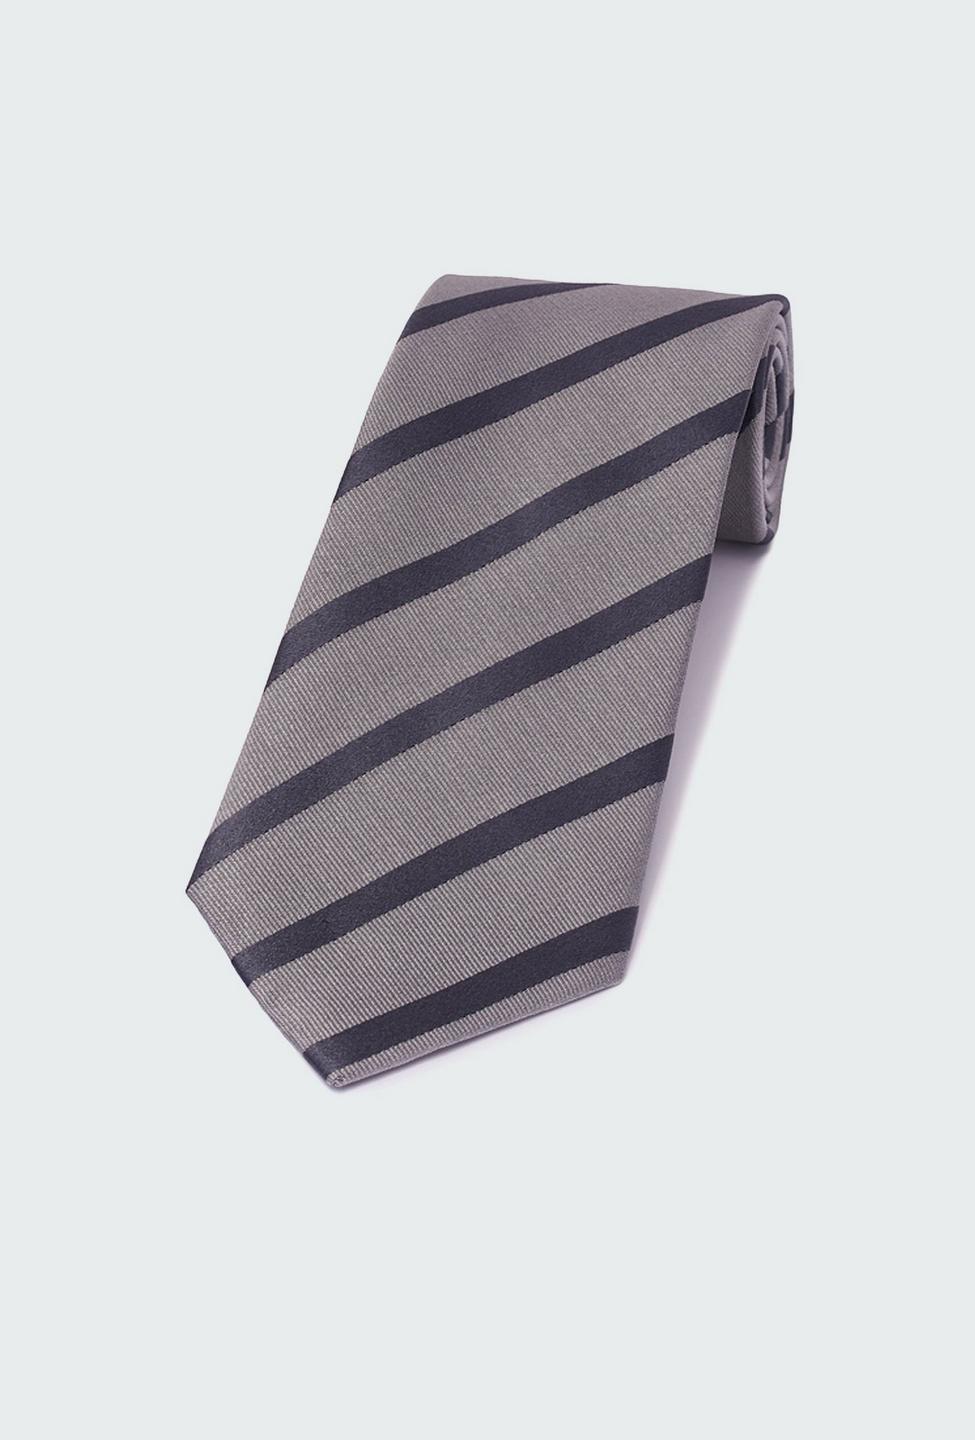 Gray tie - Striped Design from Indochino Collection